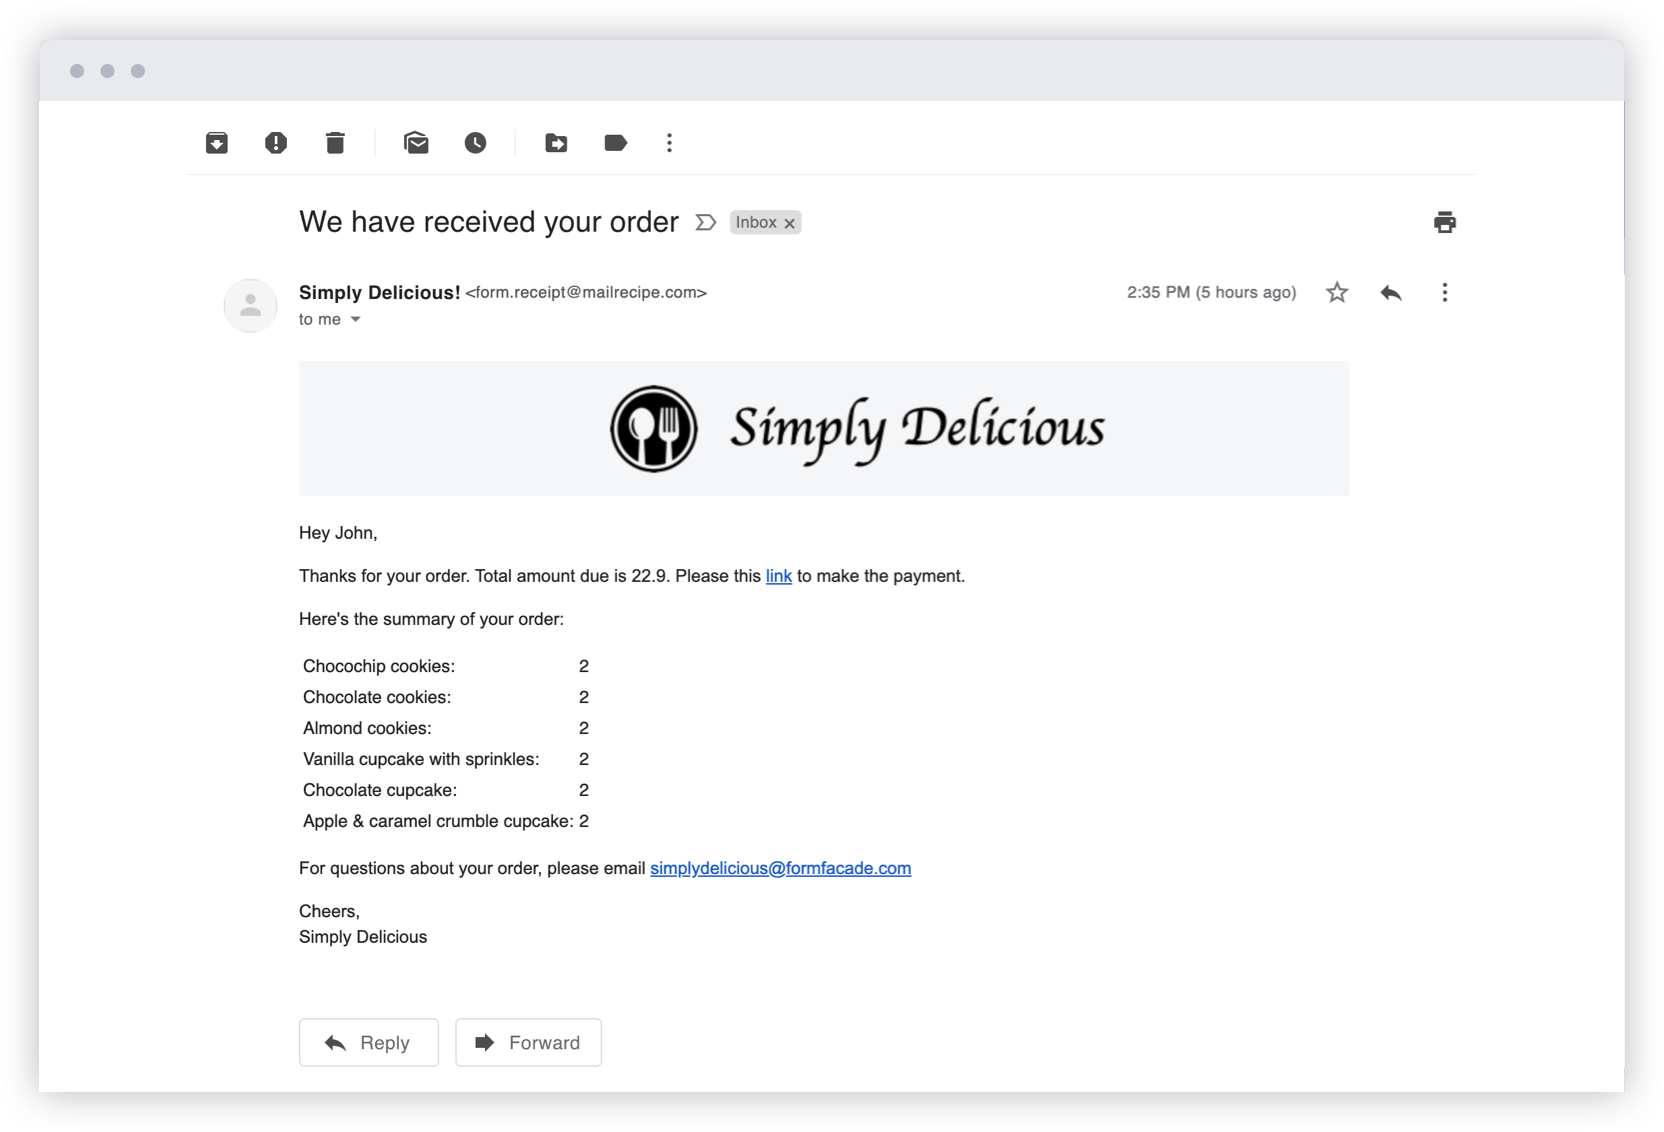 You can personalize the email content by including required form fields in the message. You can also use the RESPONSE function to show all the answers submitted by the user and the SUMMARY function to show the order summary.